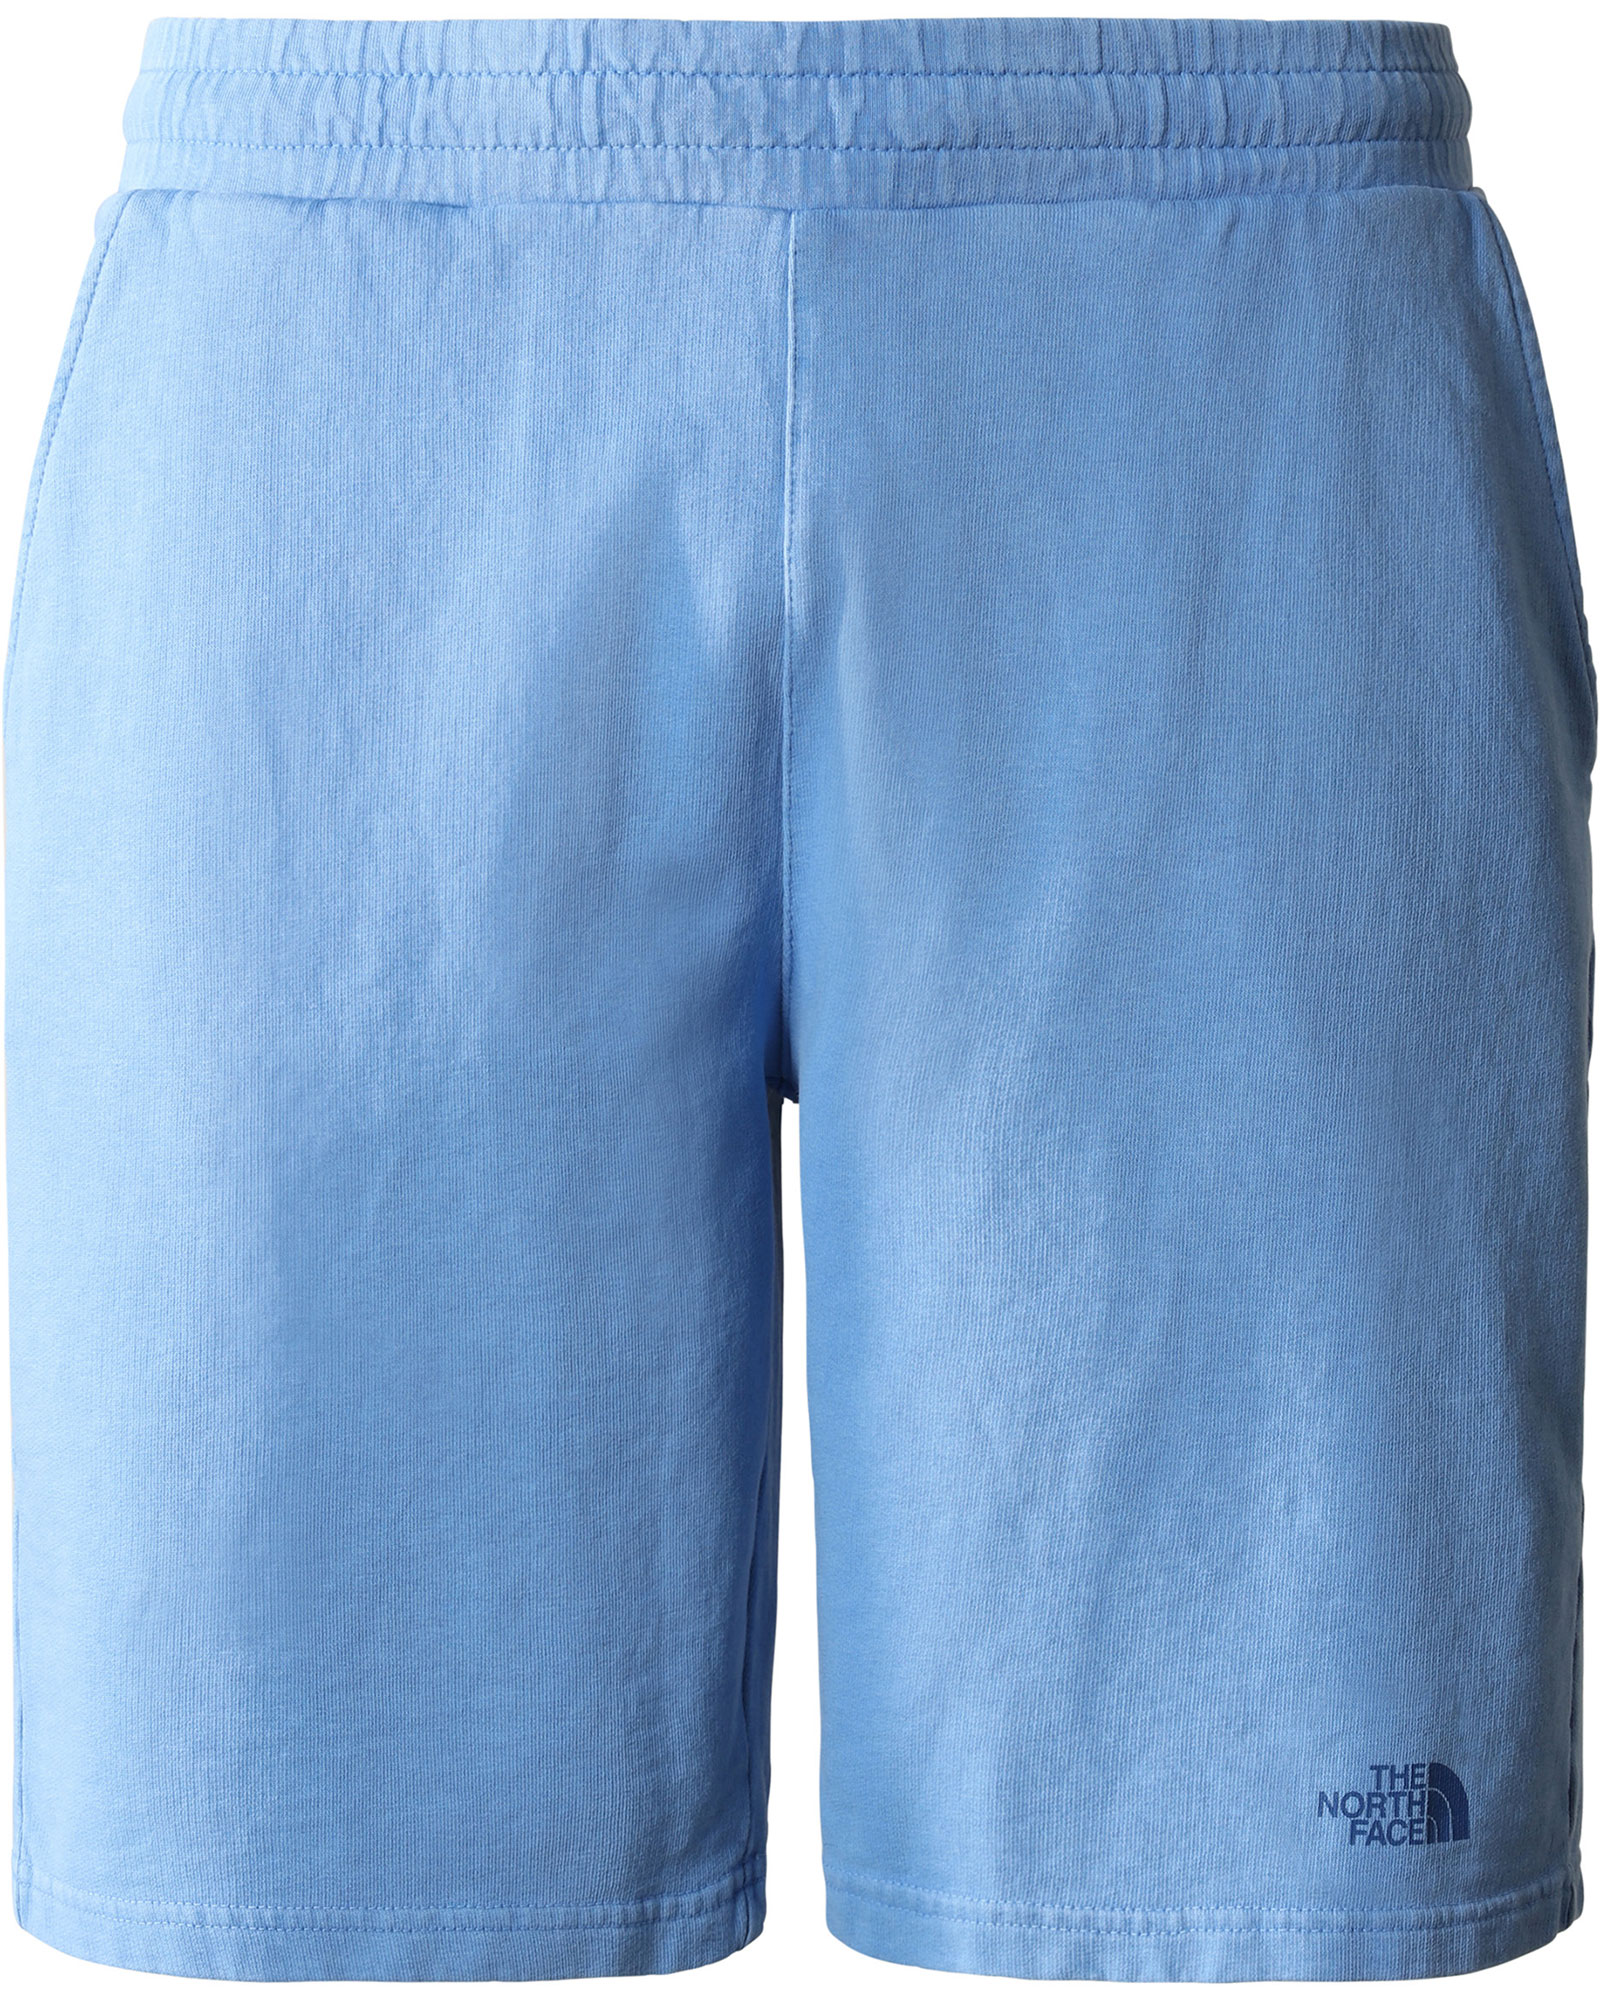 The North Face Men’s Heritage Dye Pack Shorts - Super Sonic Blue L